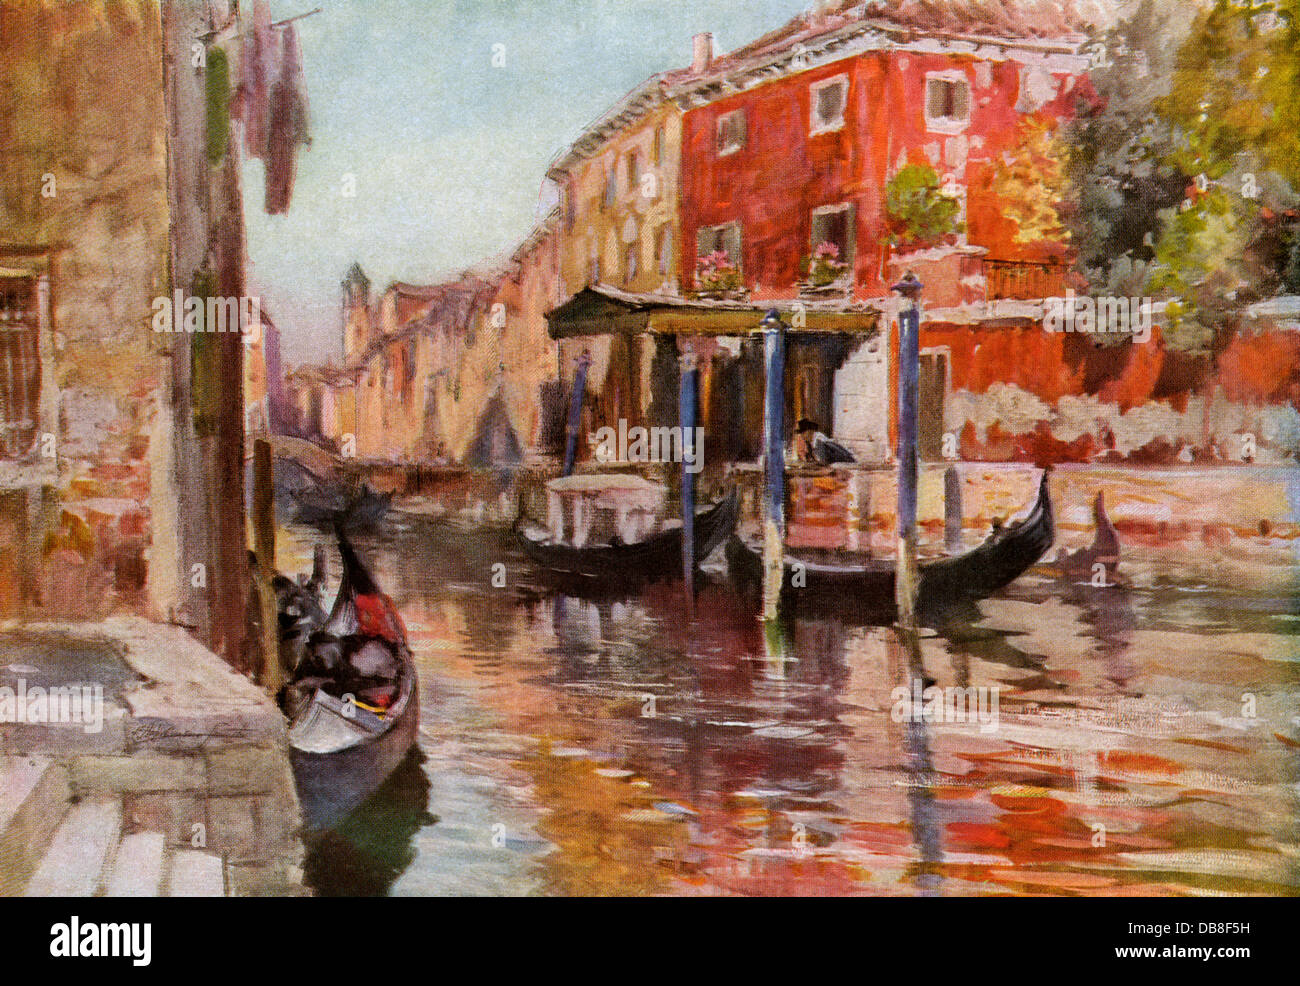 Gondolas along a canal in Venice, circa 1900. Color halftone reproduction of a painting Stock Photo